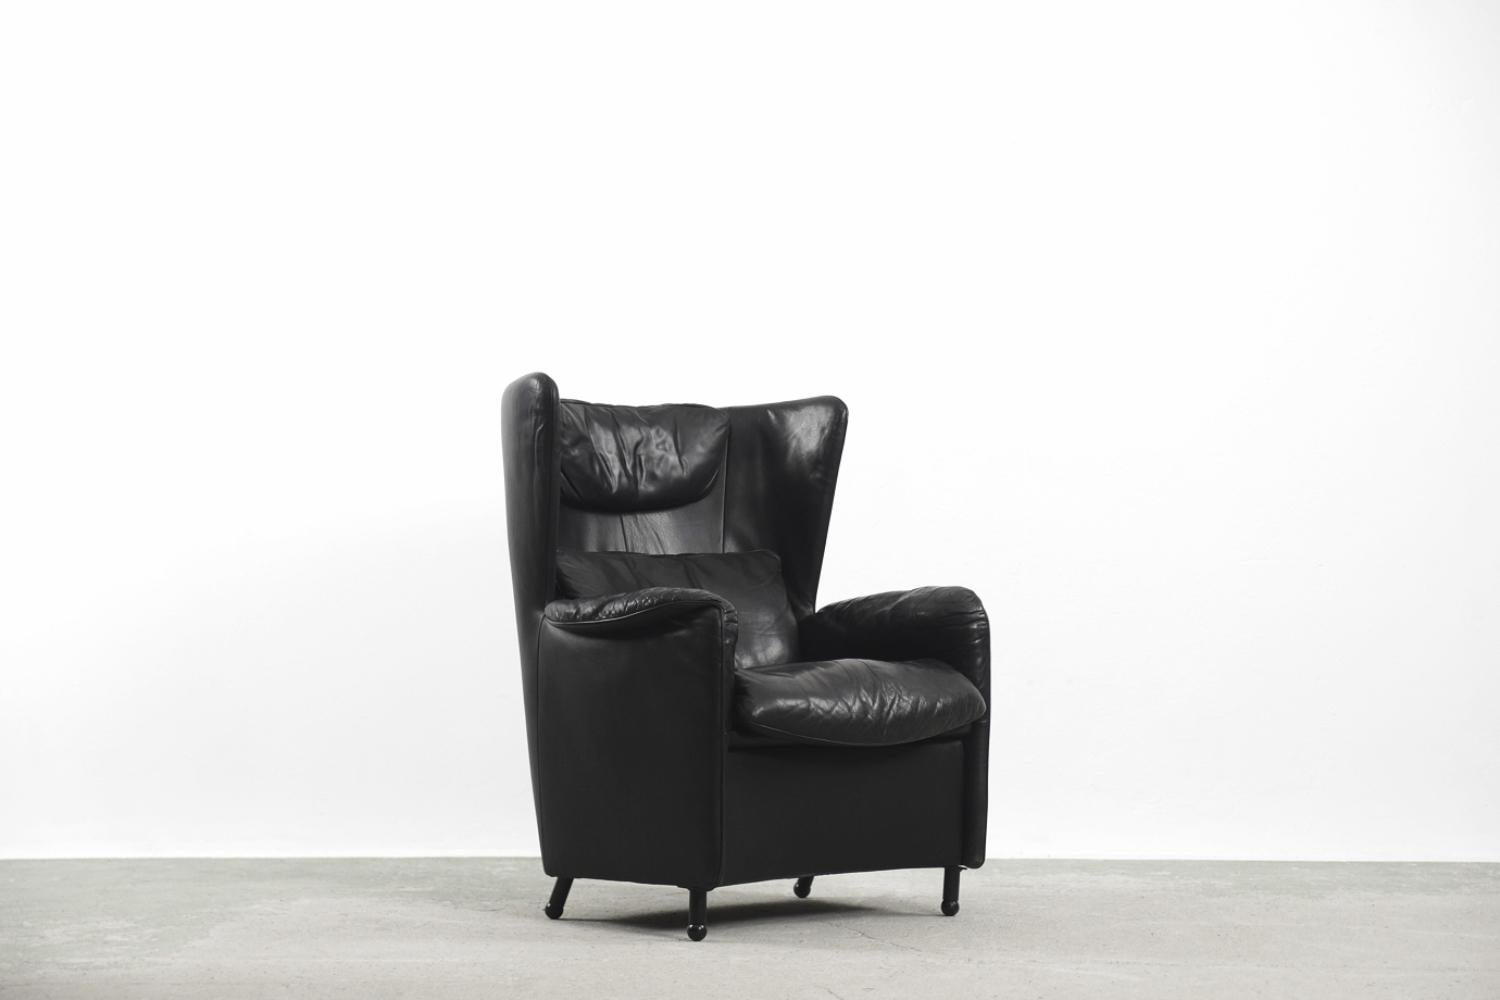 This is the first edition of the DS-23 armchair designed by Franz Josef Schulte for the Swiss manufactured De Sede during the 1980s. It is a luxurious leather armchair that is still produced today by professionals from De Sede, Switzerland. Our